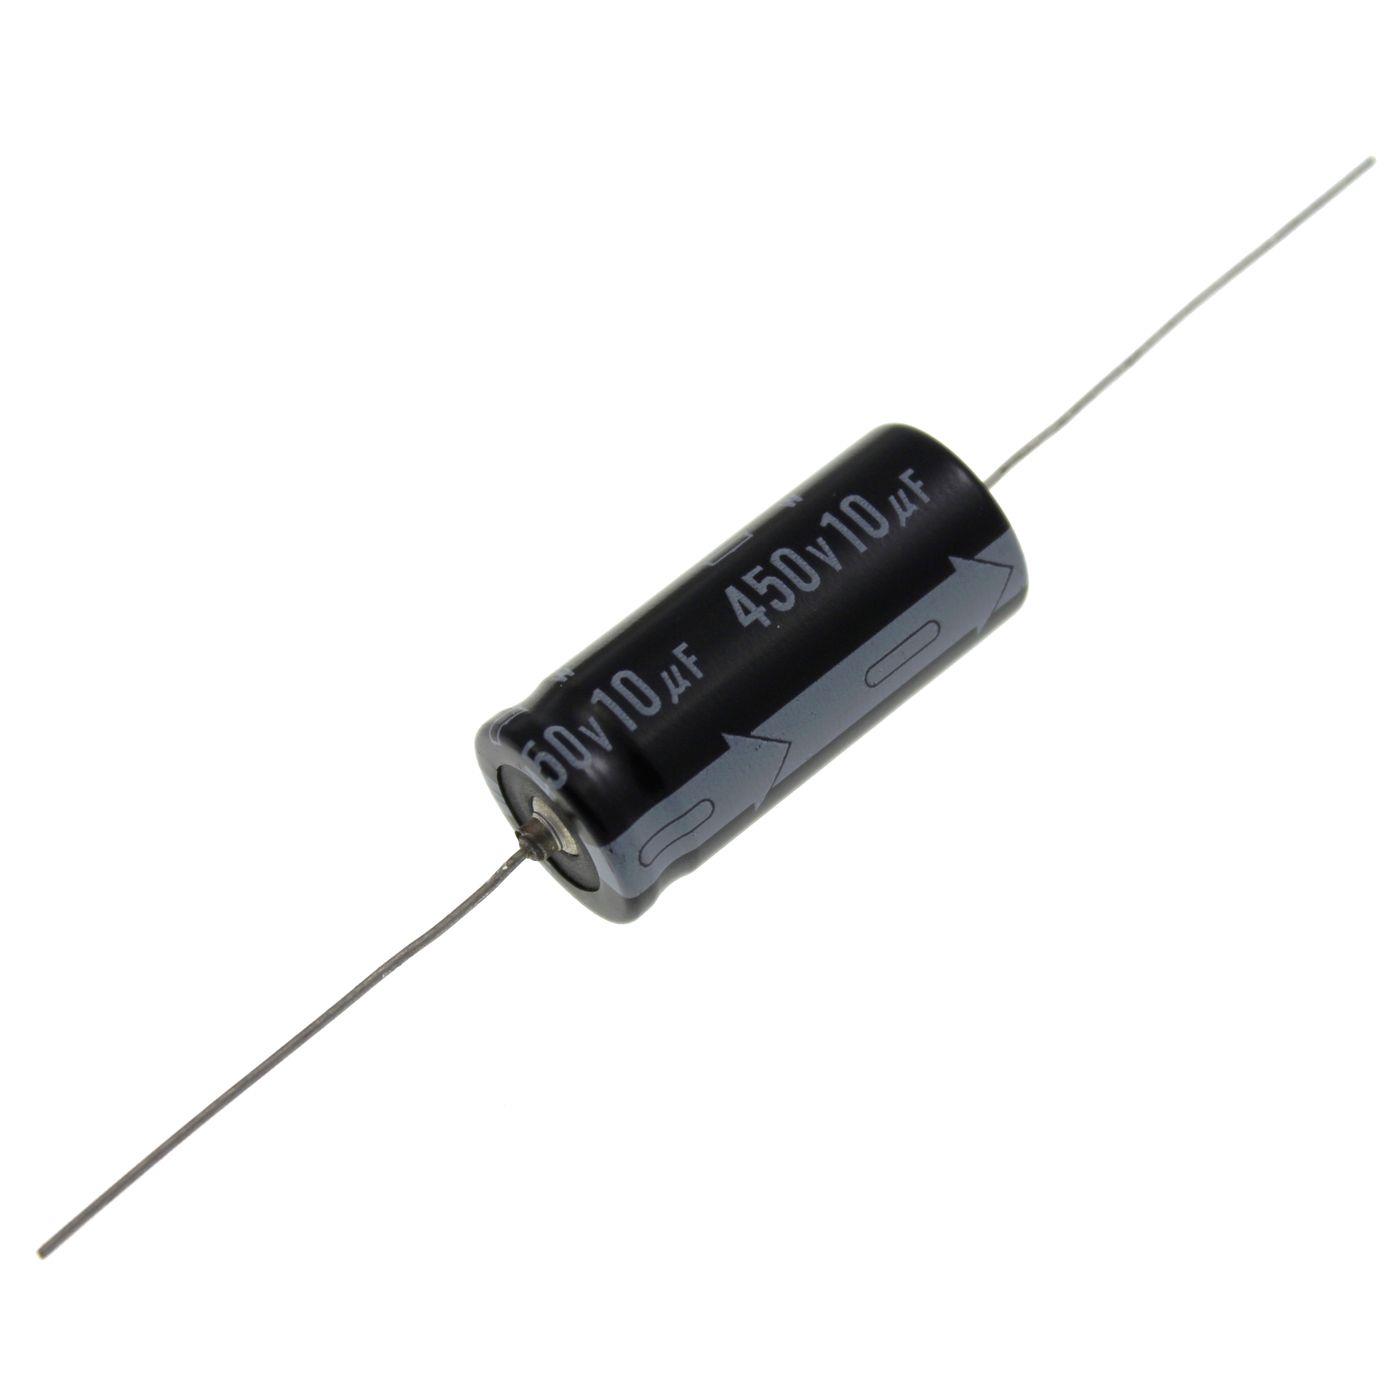 Electrolytic capacitor Axially 10µF 450V 85°C 1W5081152T00SIE 10uF